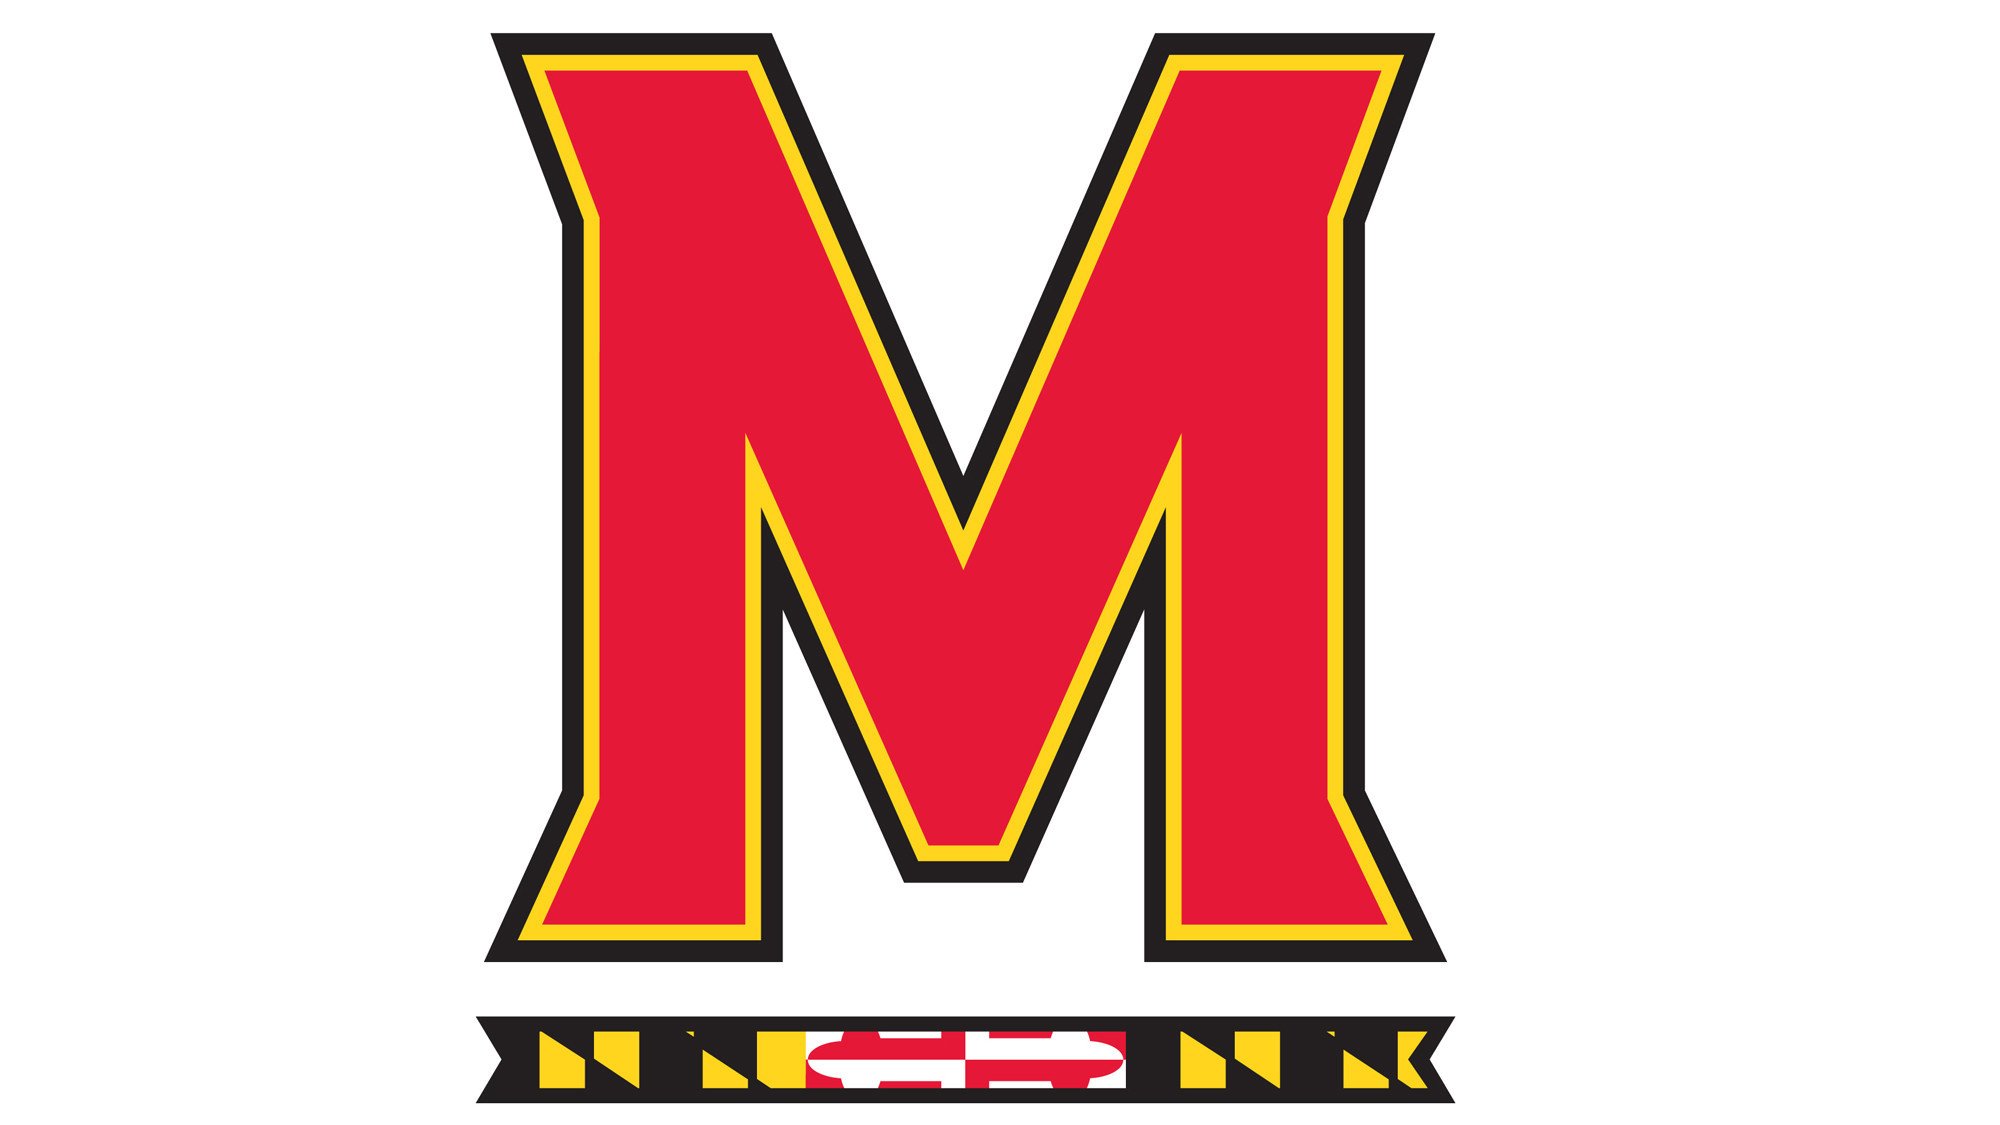 MARYLAND TERRAPINS college football wallpaper background